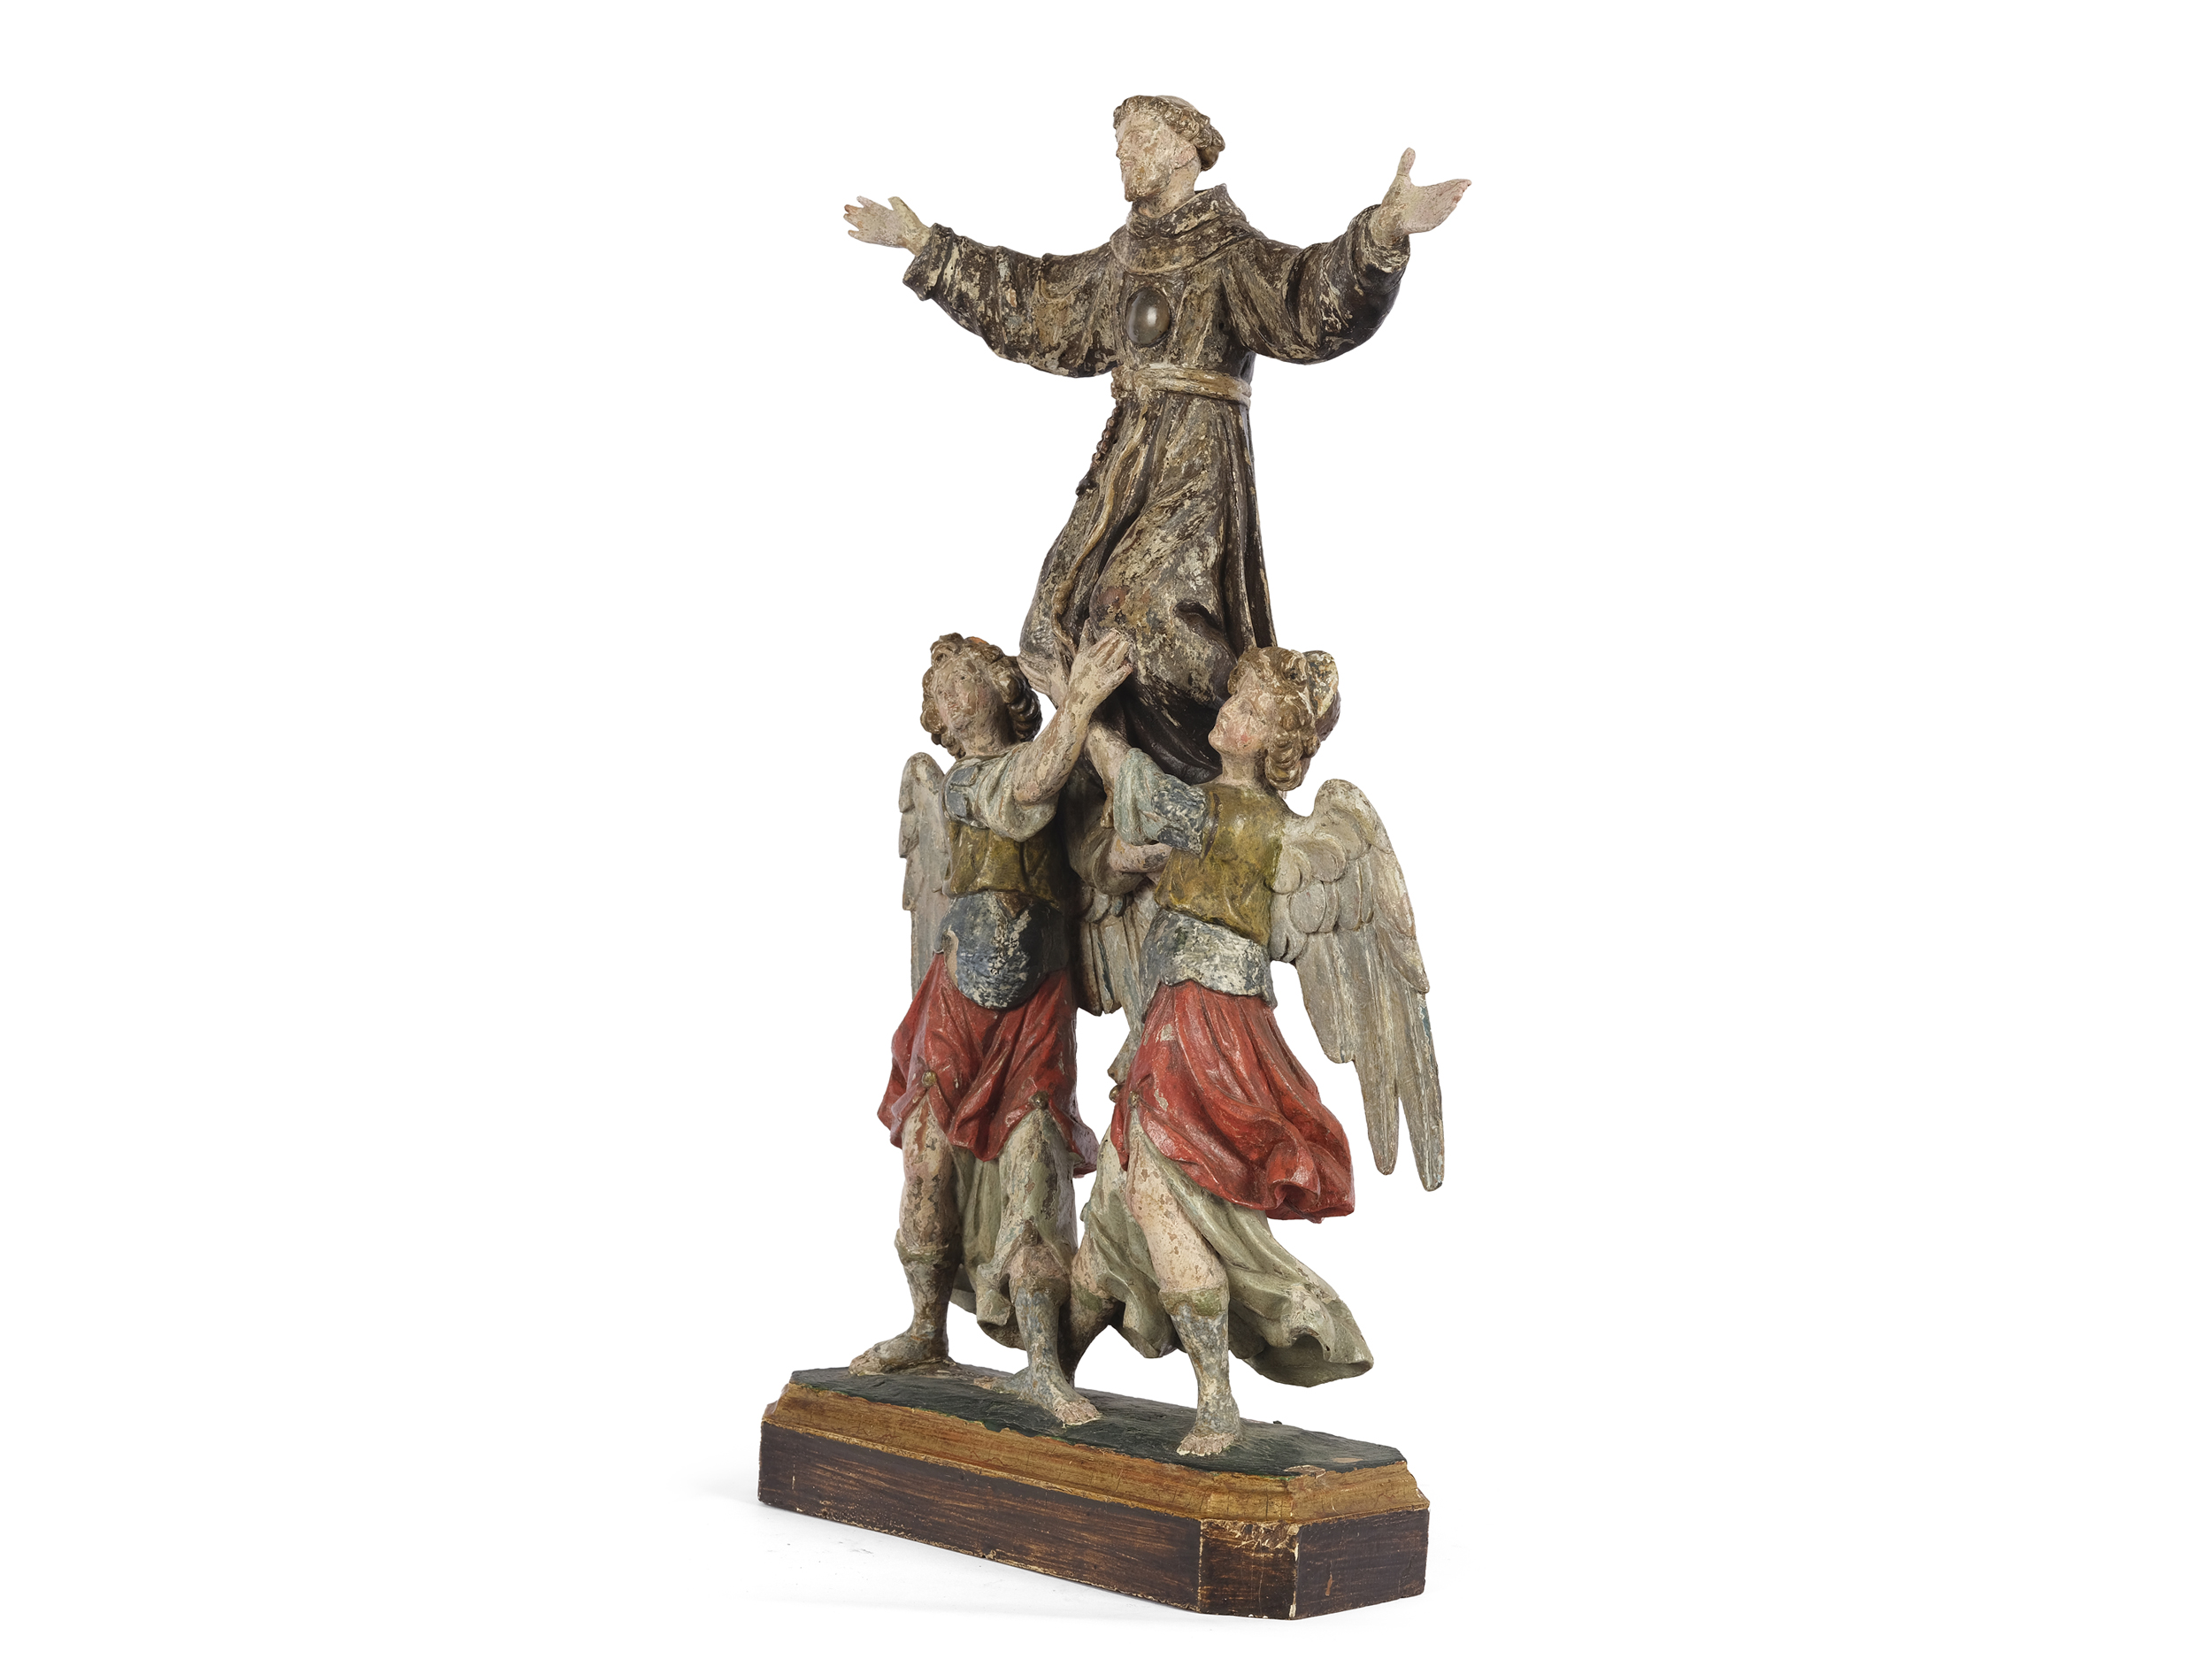 Saint Francis of Assisi with two angels, 17th century, Upper Italy/South Tyrol - Image 2 of 5